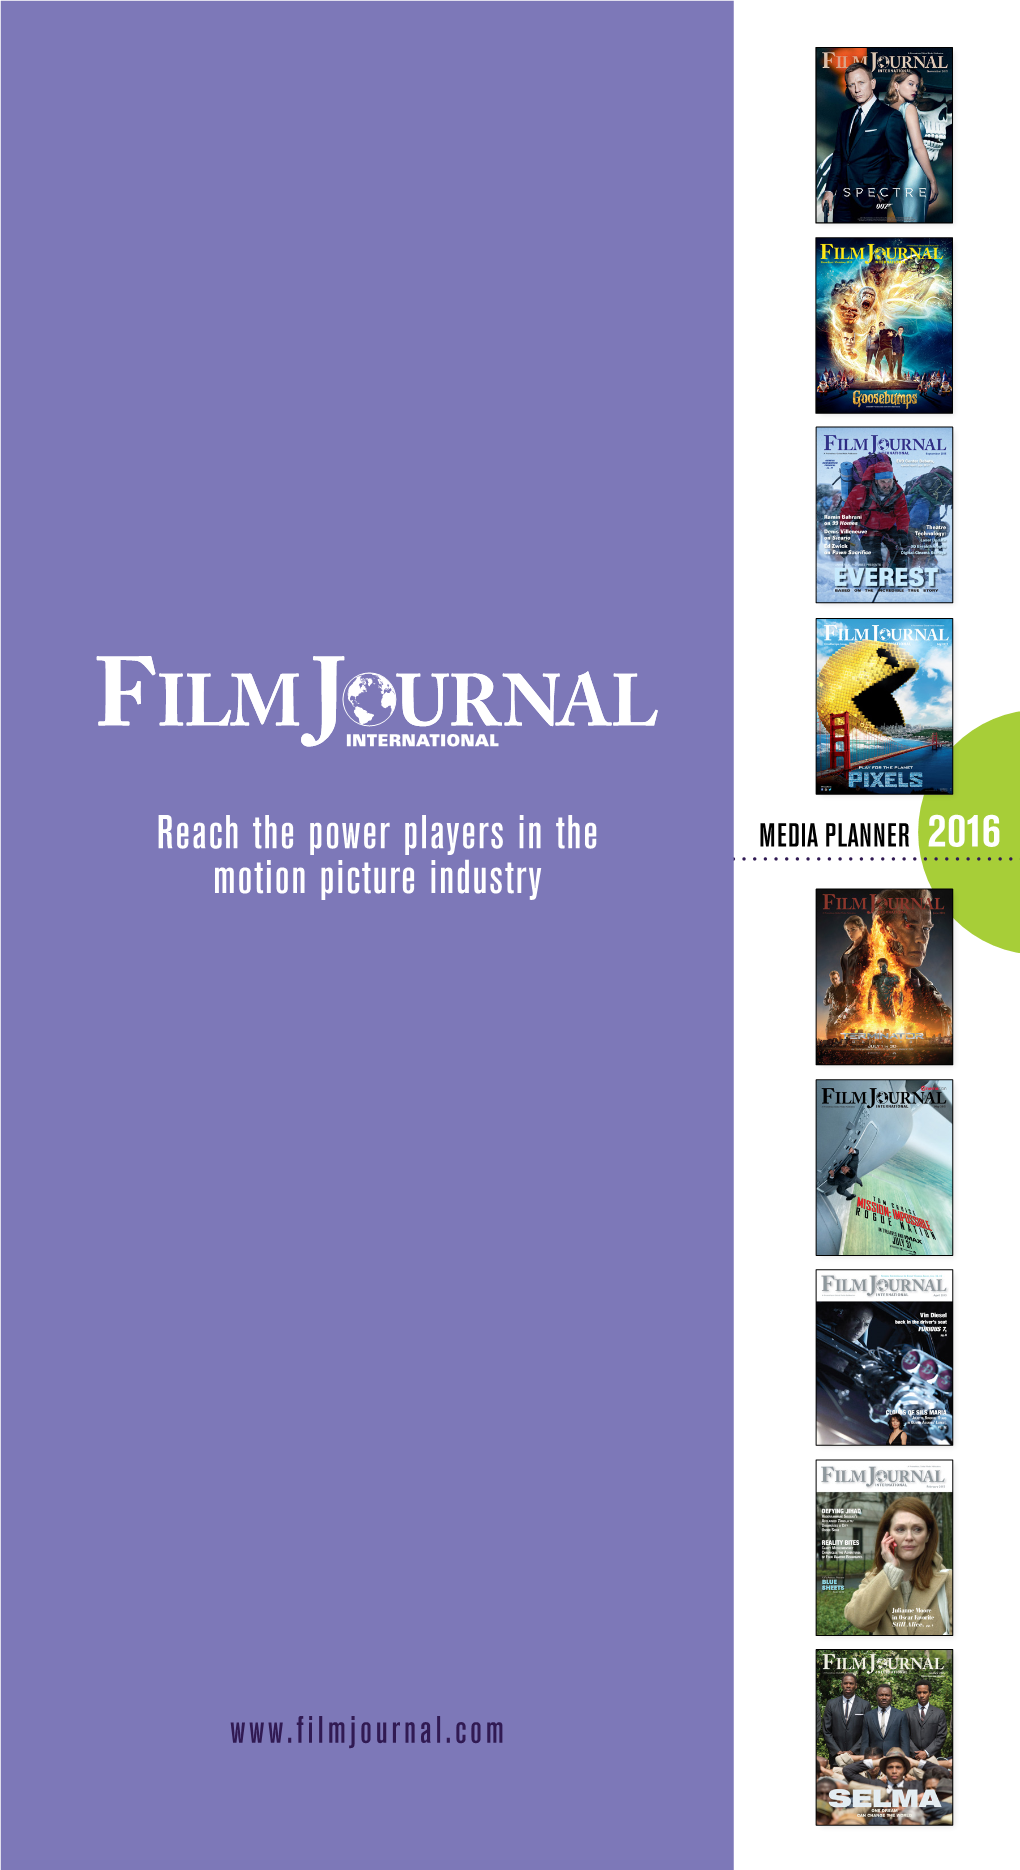 Reach the Power Players in the Motion Picture Industry